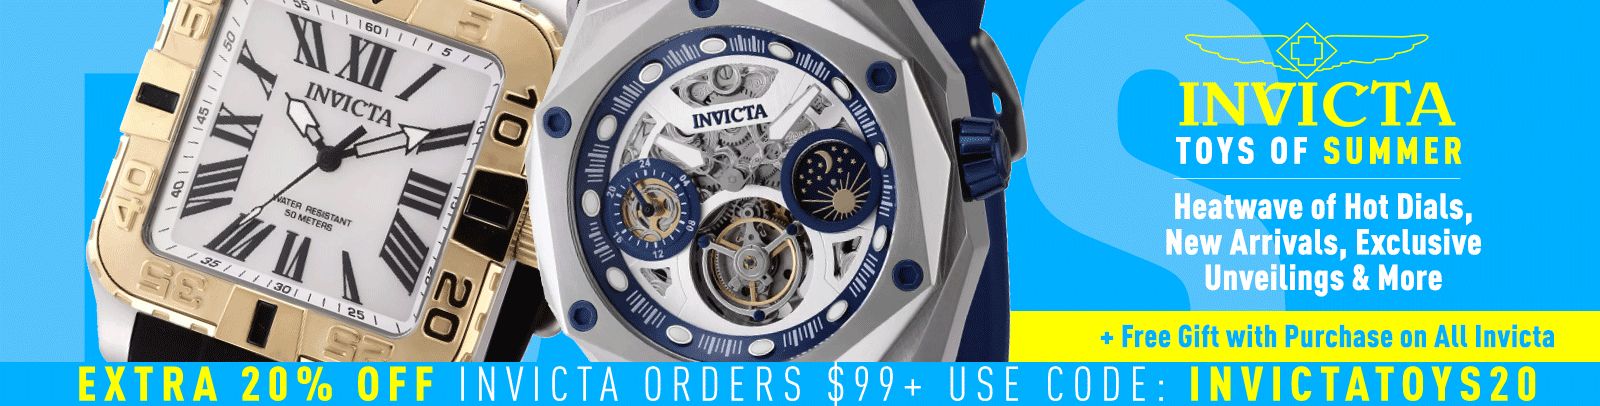 Invicta Toys of Summer |  Heatwave of Hot Dials, New Arrivals, Exclusive Unveilings & More 918-134, 922-070